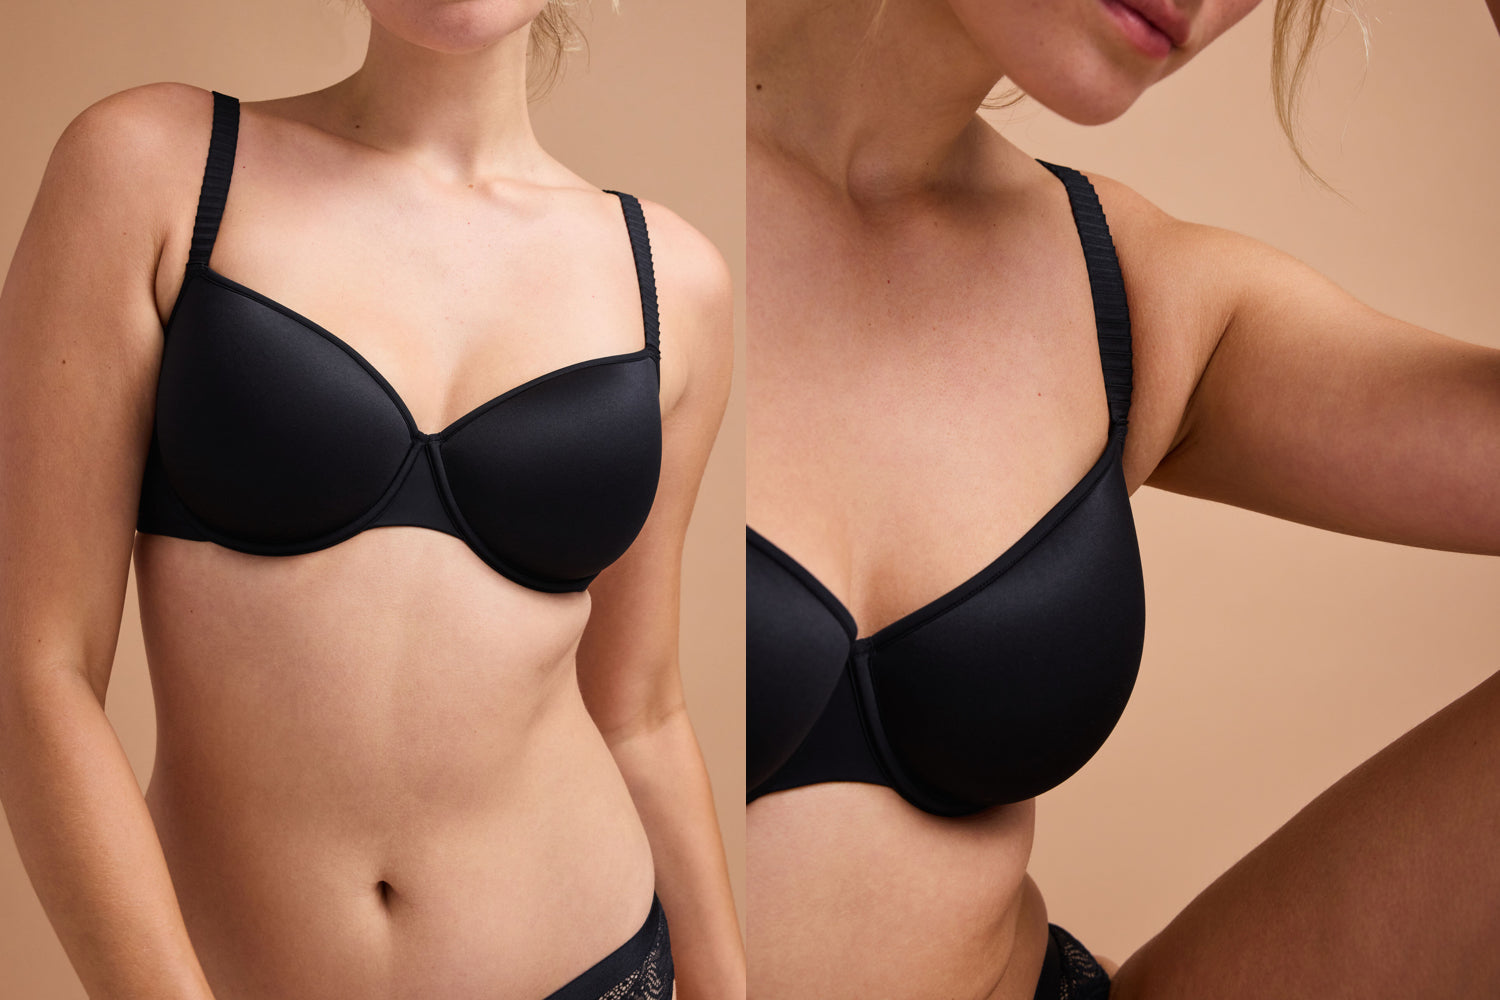 Fruutfull - We've created a better fitting bra, no matter the cup